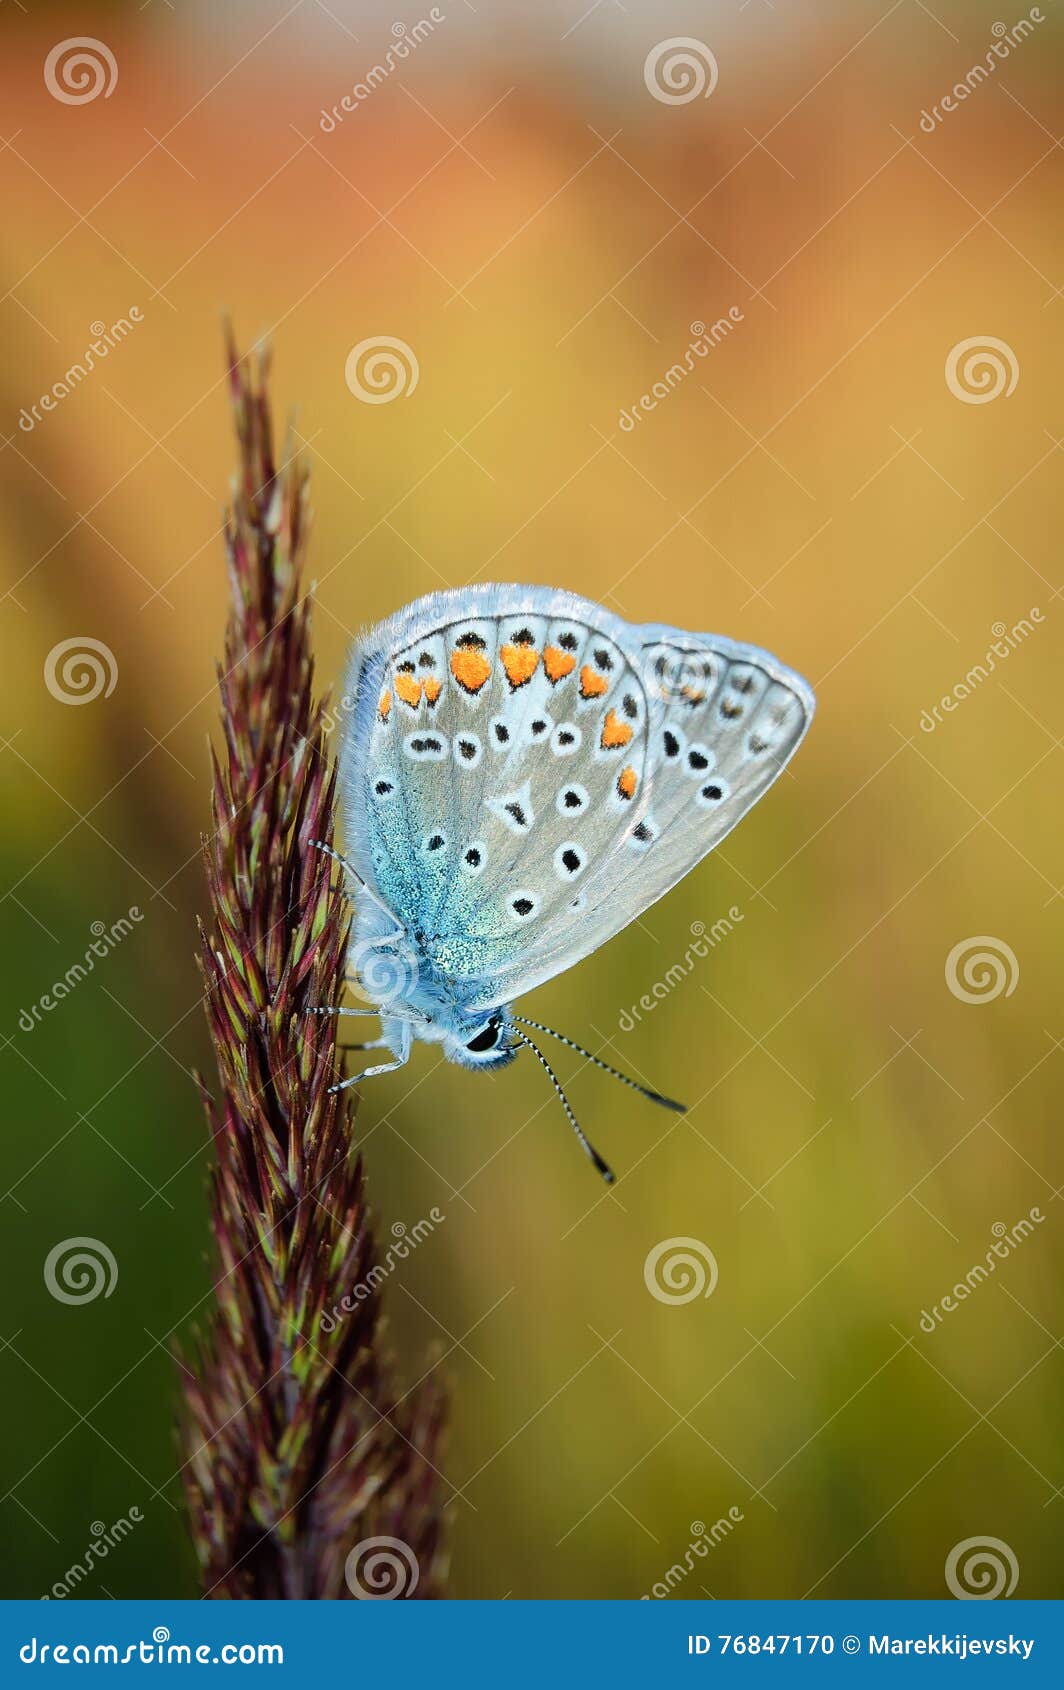 polyommatus bellargus, adonis blue, is a butterfly in the family lycaenidae. beautiful butterfly sitting on stem.